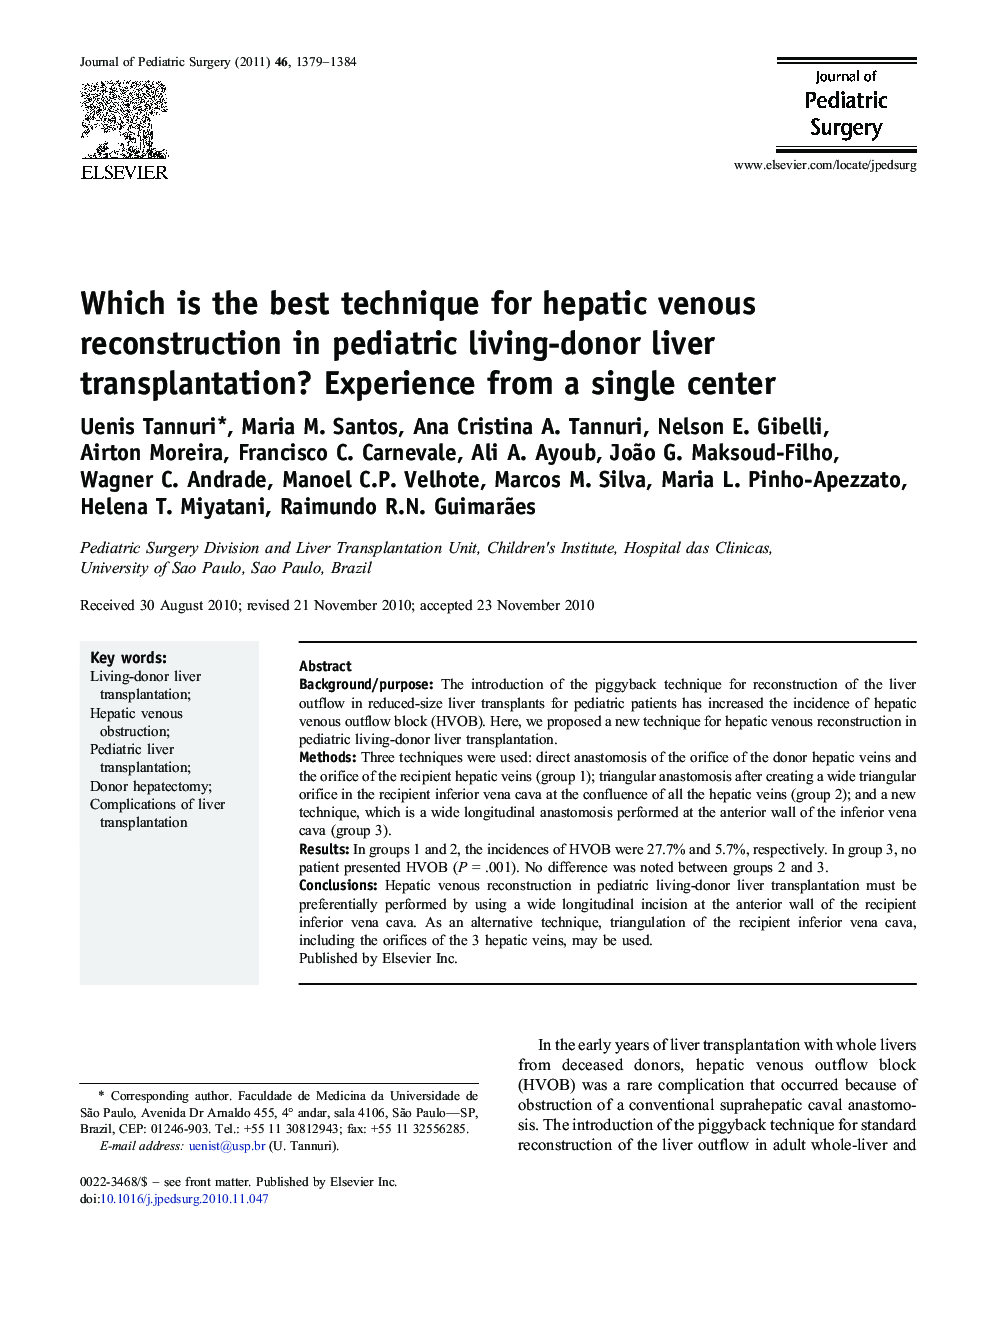 Which is the best technique for hepatic venous reconstruction in pediatric living-donor liver transplantation? Experience from a single center